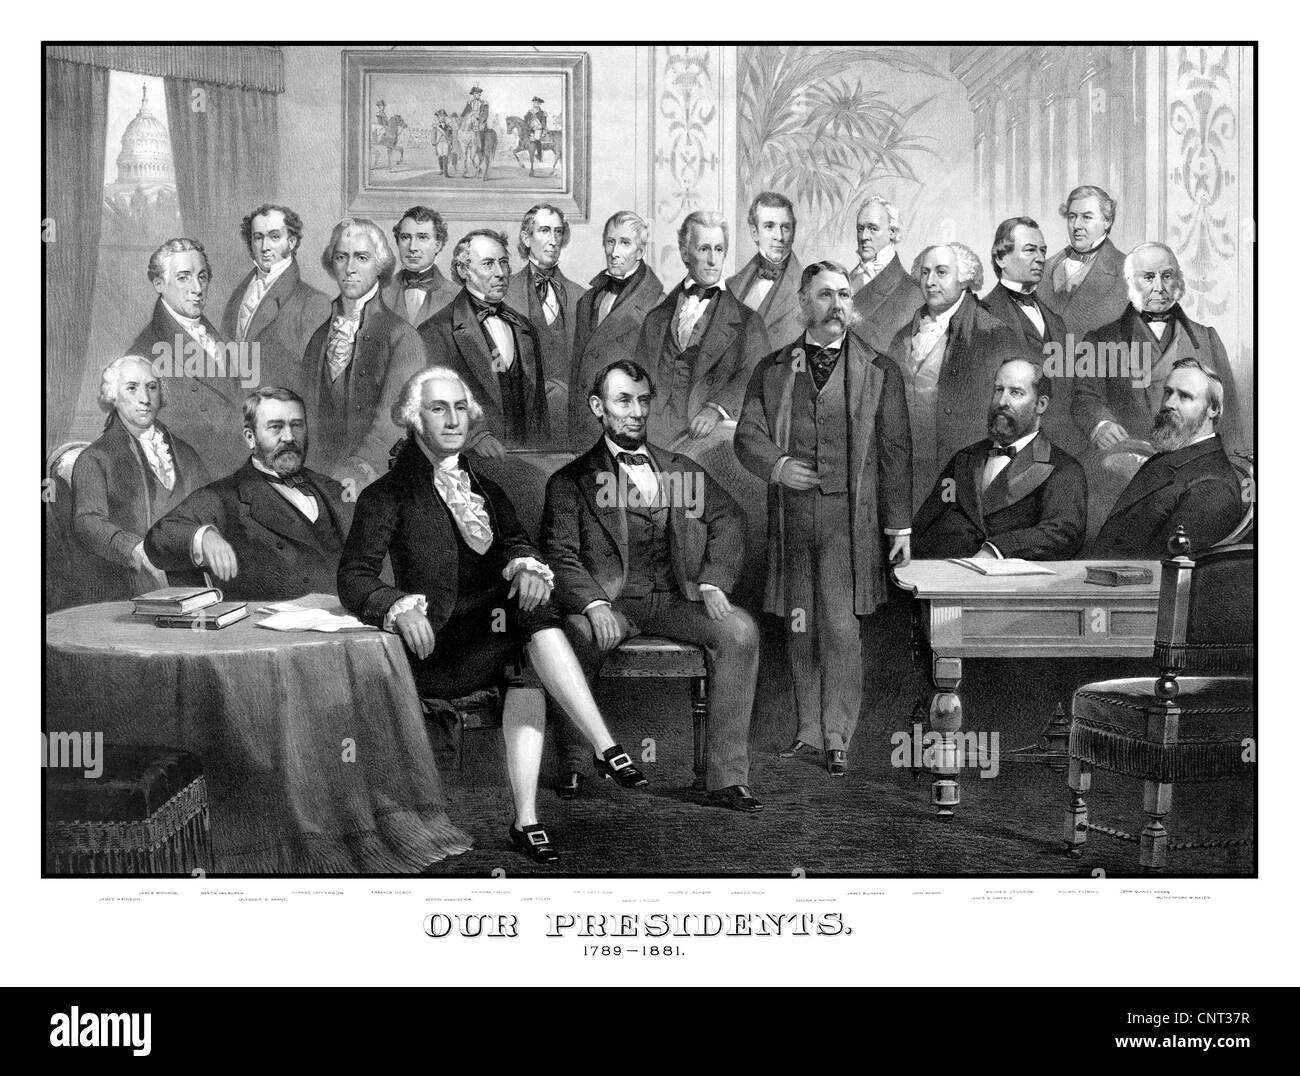 Vintage American history print of the first twenty-one Presidents of The United States seated together in The White House. Stock Photo